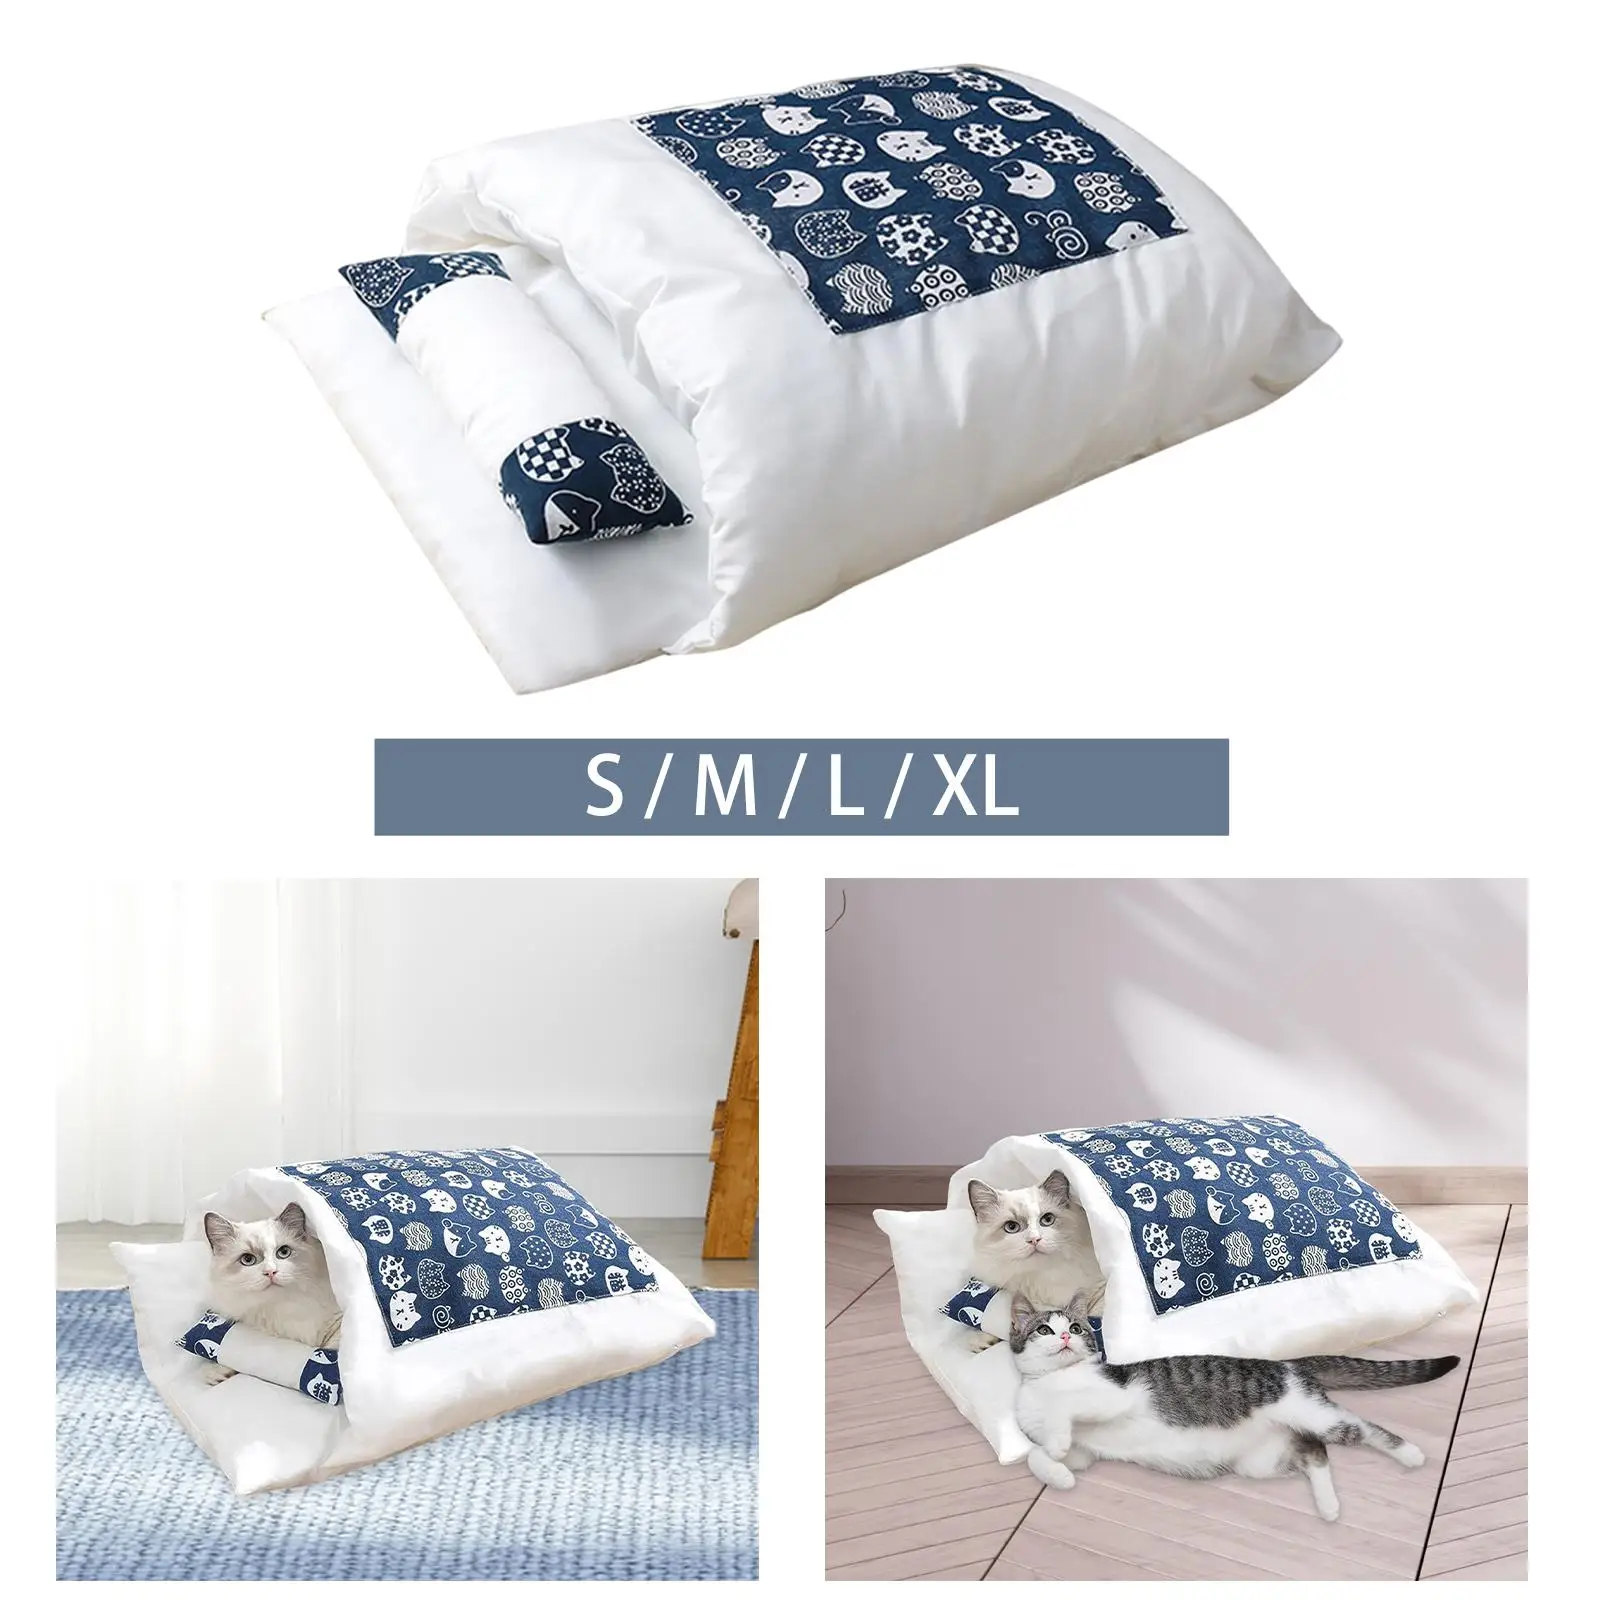 Cat Beds Snuggle Sack Pets Supplies Shelter Kitten House Removable Cute Plush Cat Sleeping Bags for Puppy Kitten Kitty Rabbit